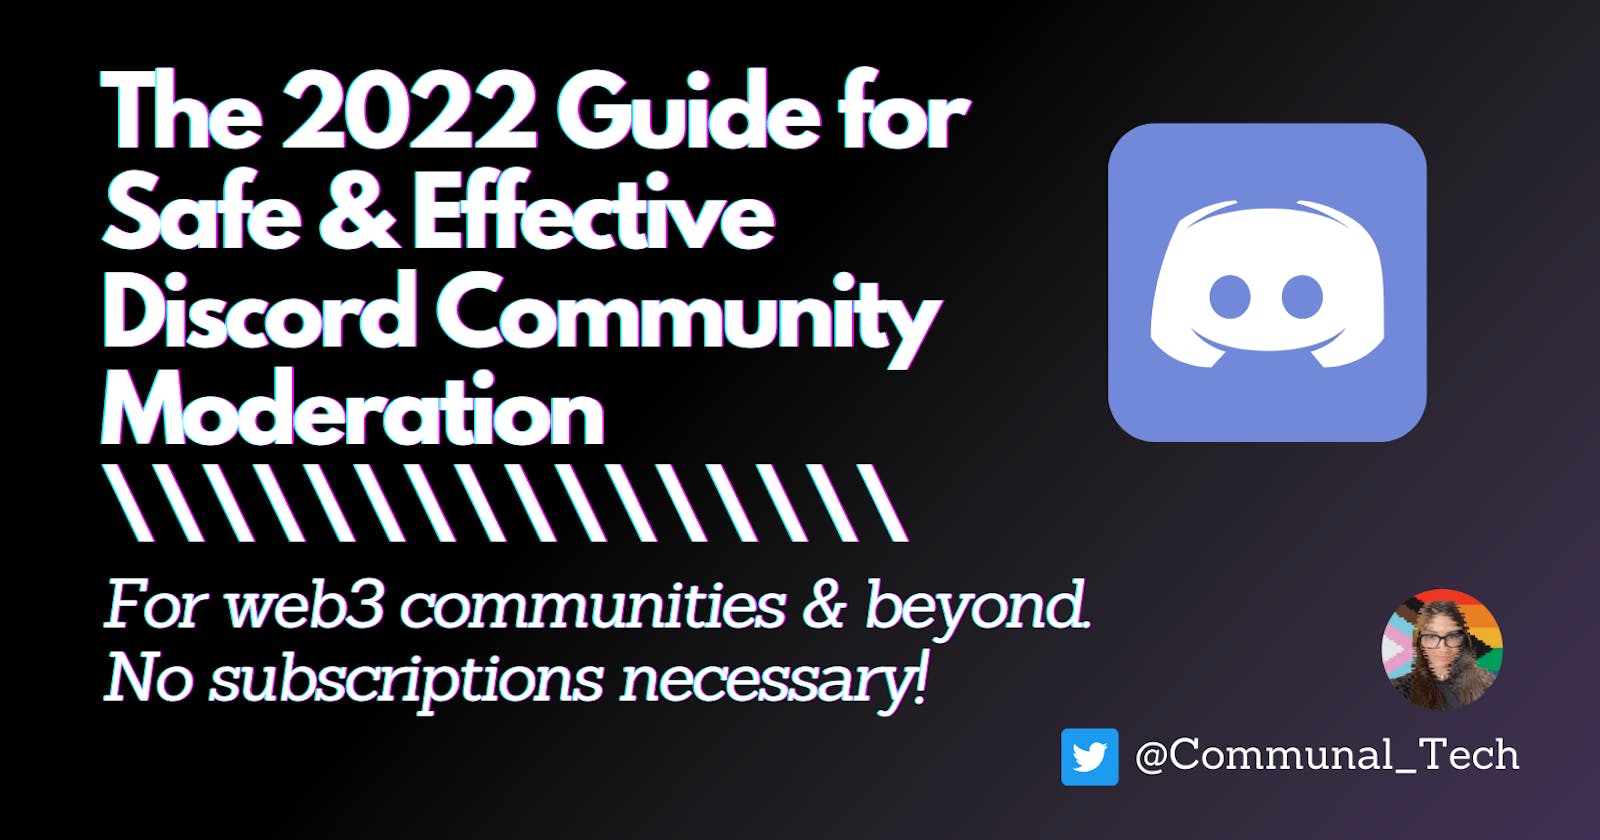 The 2022 Guide for Safe & Effective Discord Community Moderation.